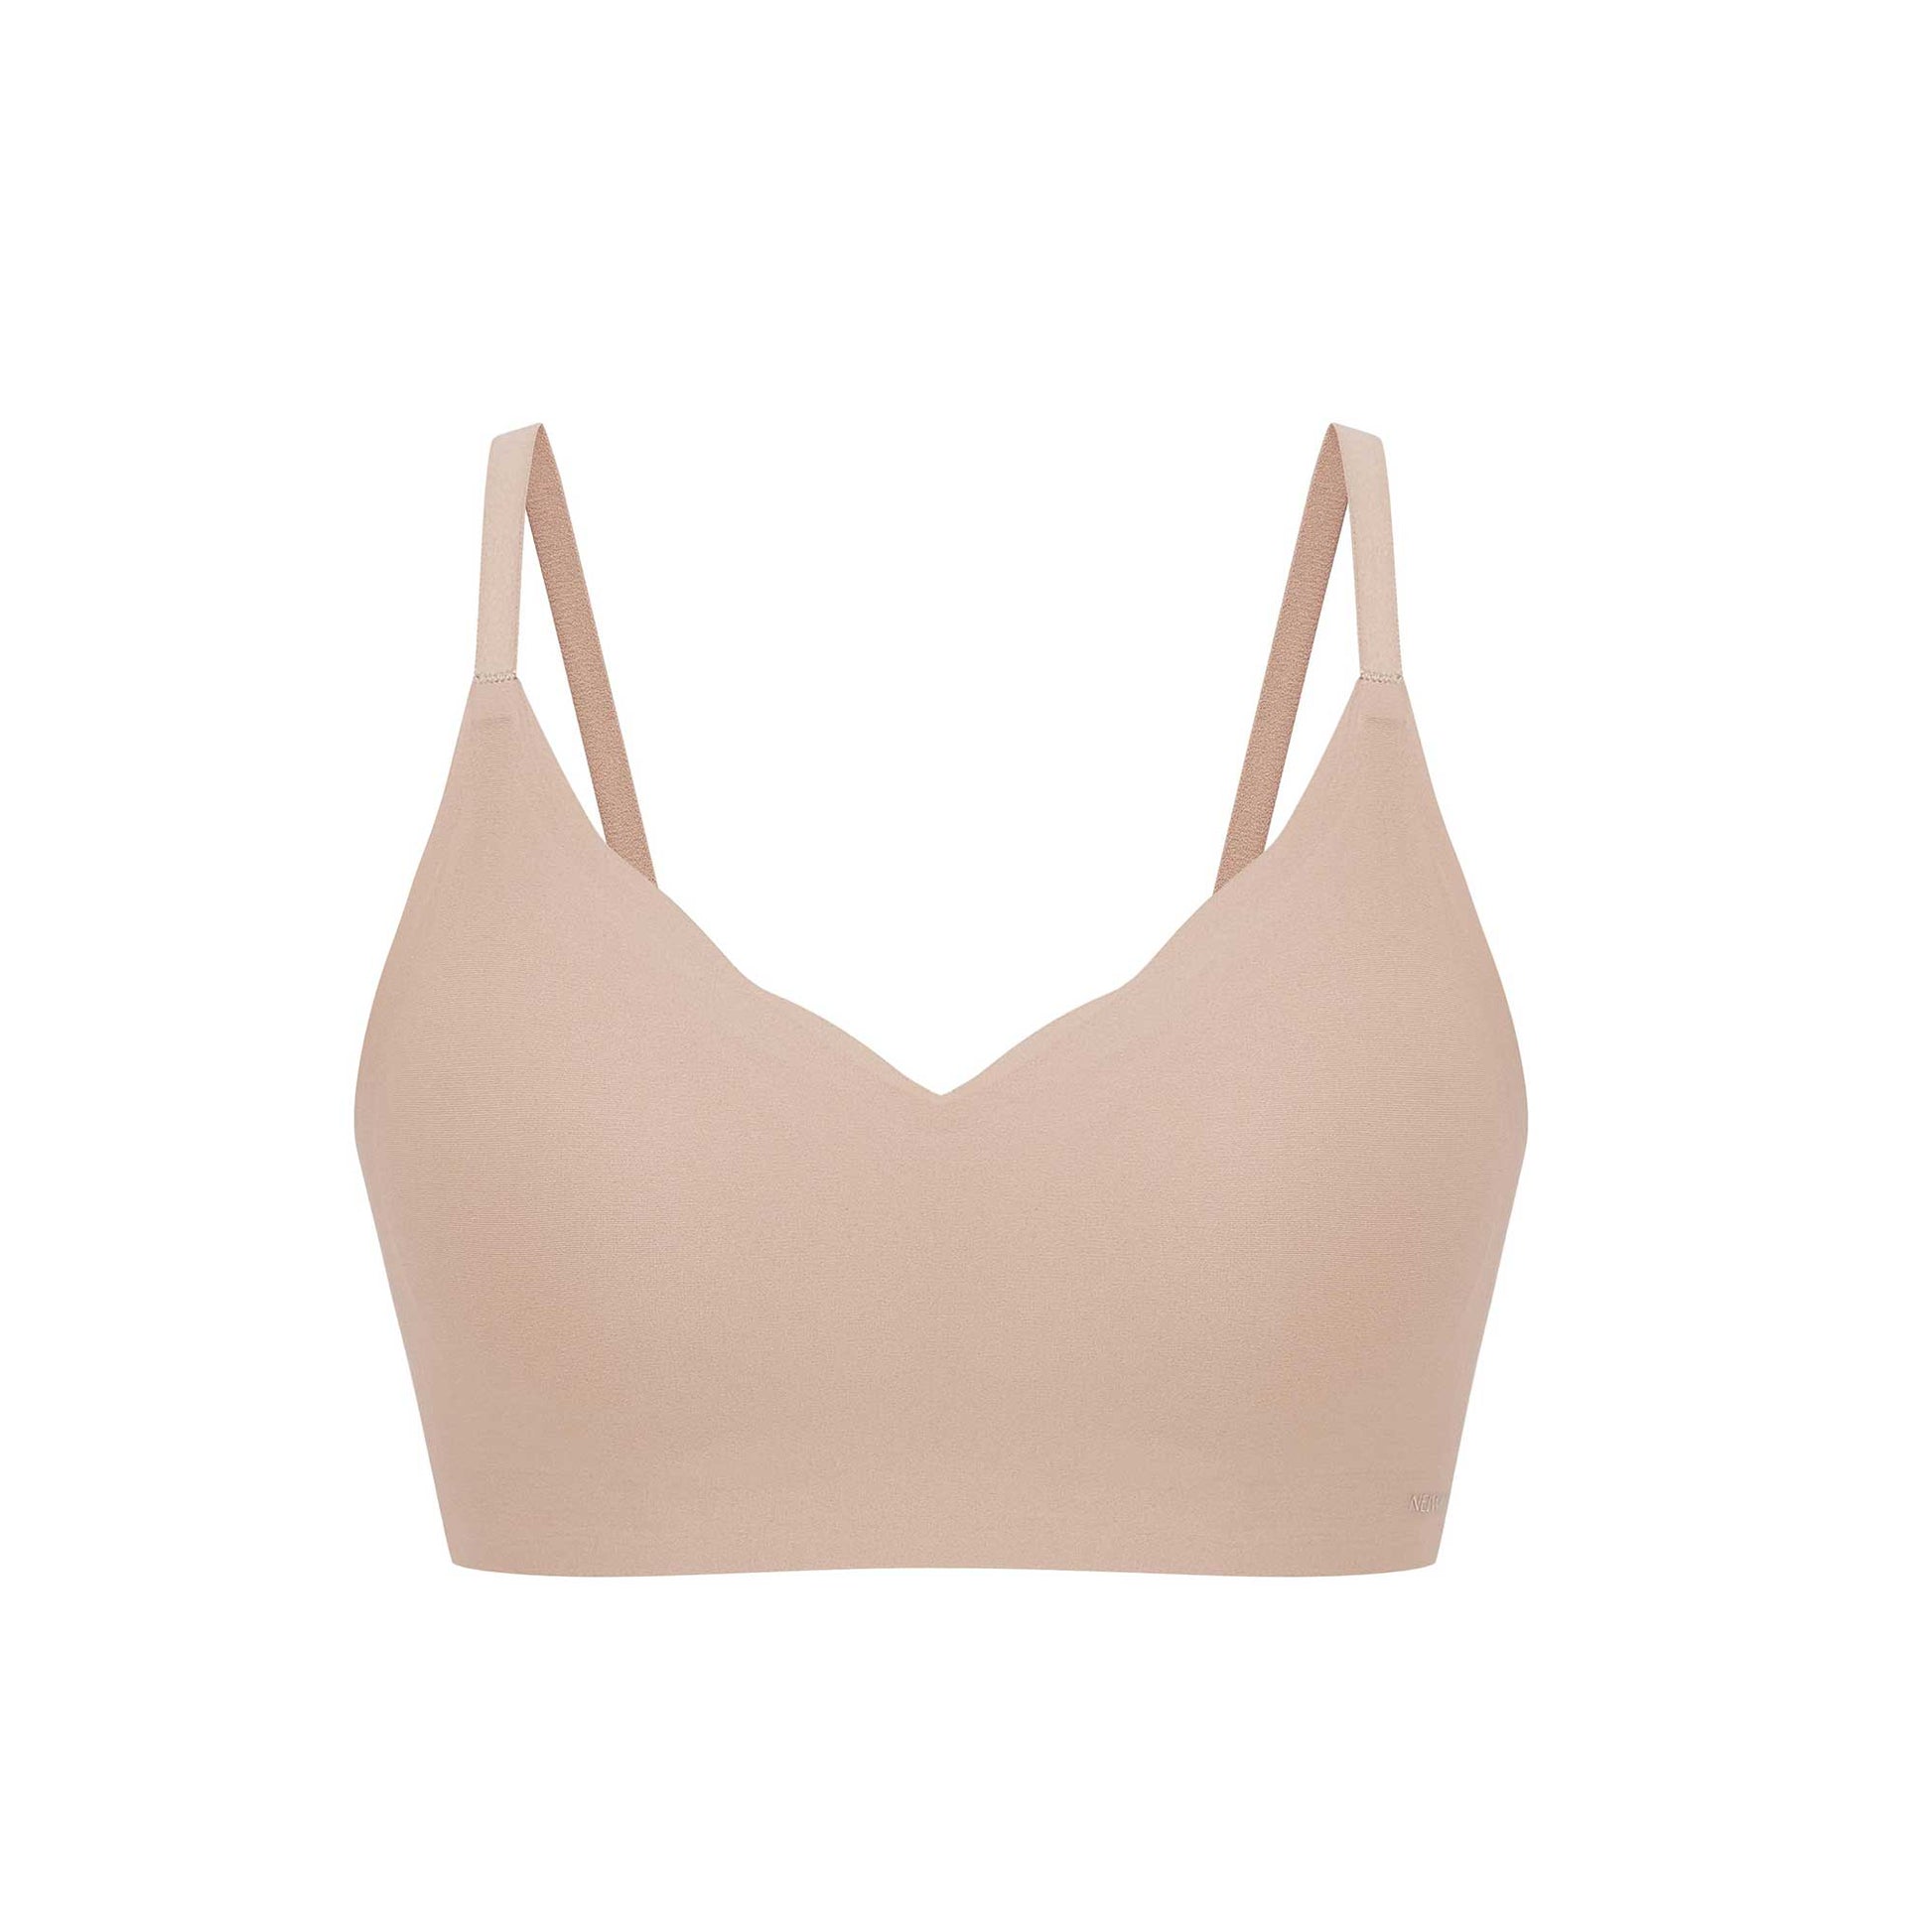 The NEW #BarelyZero Fixed Cup Wavy Bra: nothing but comfort